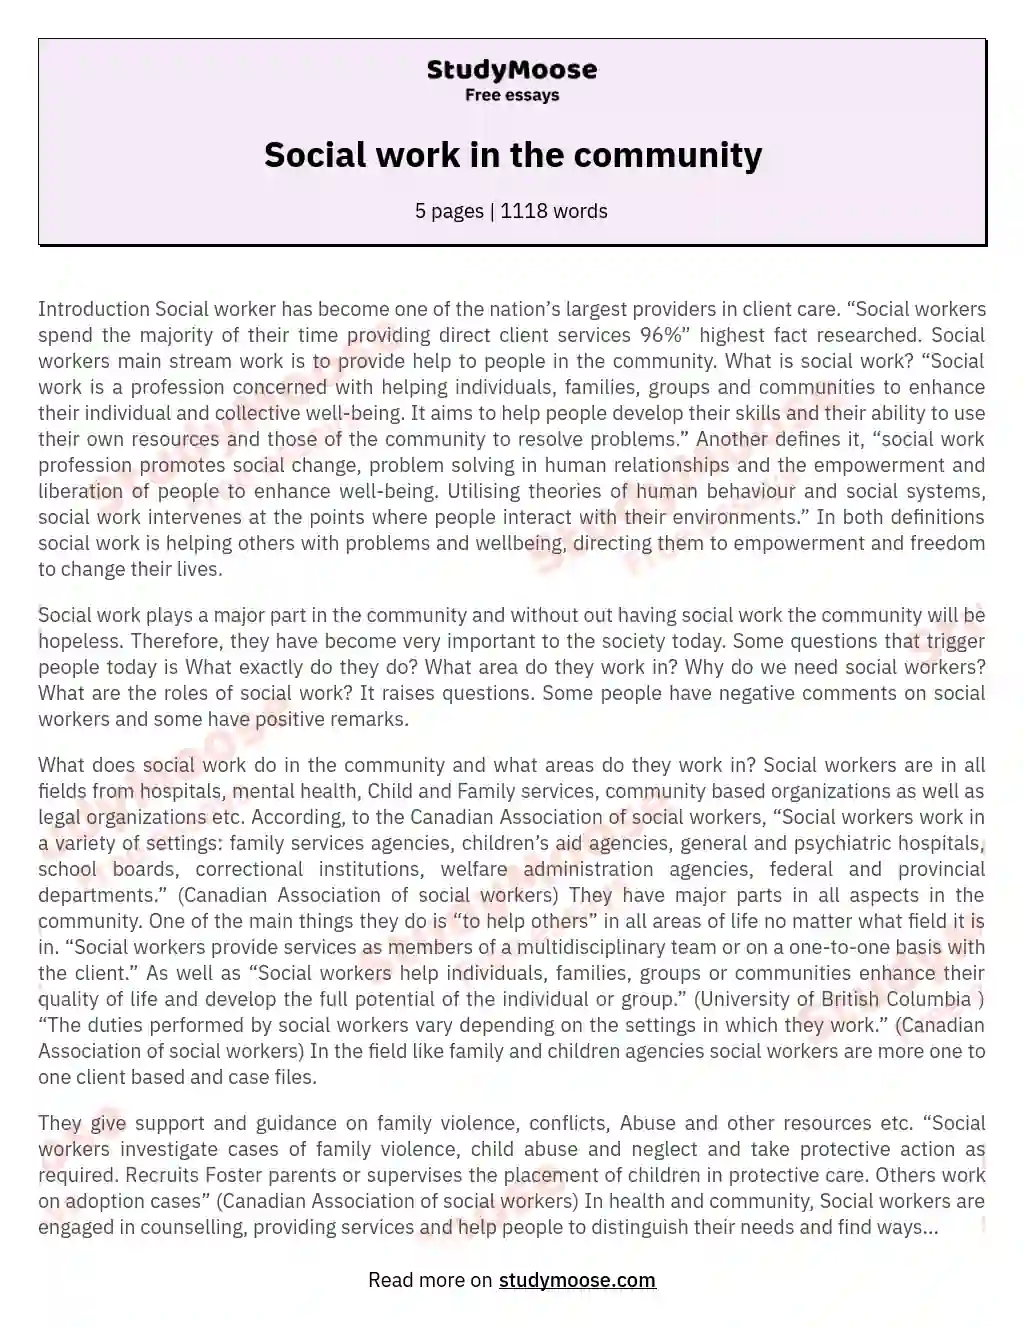 Social work in the community essay